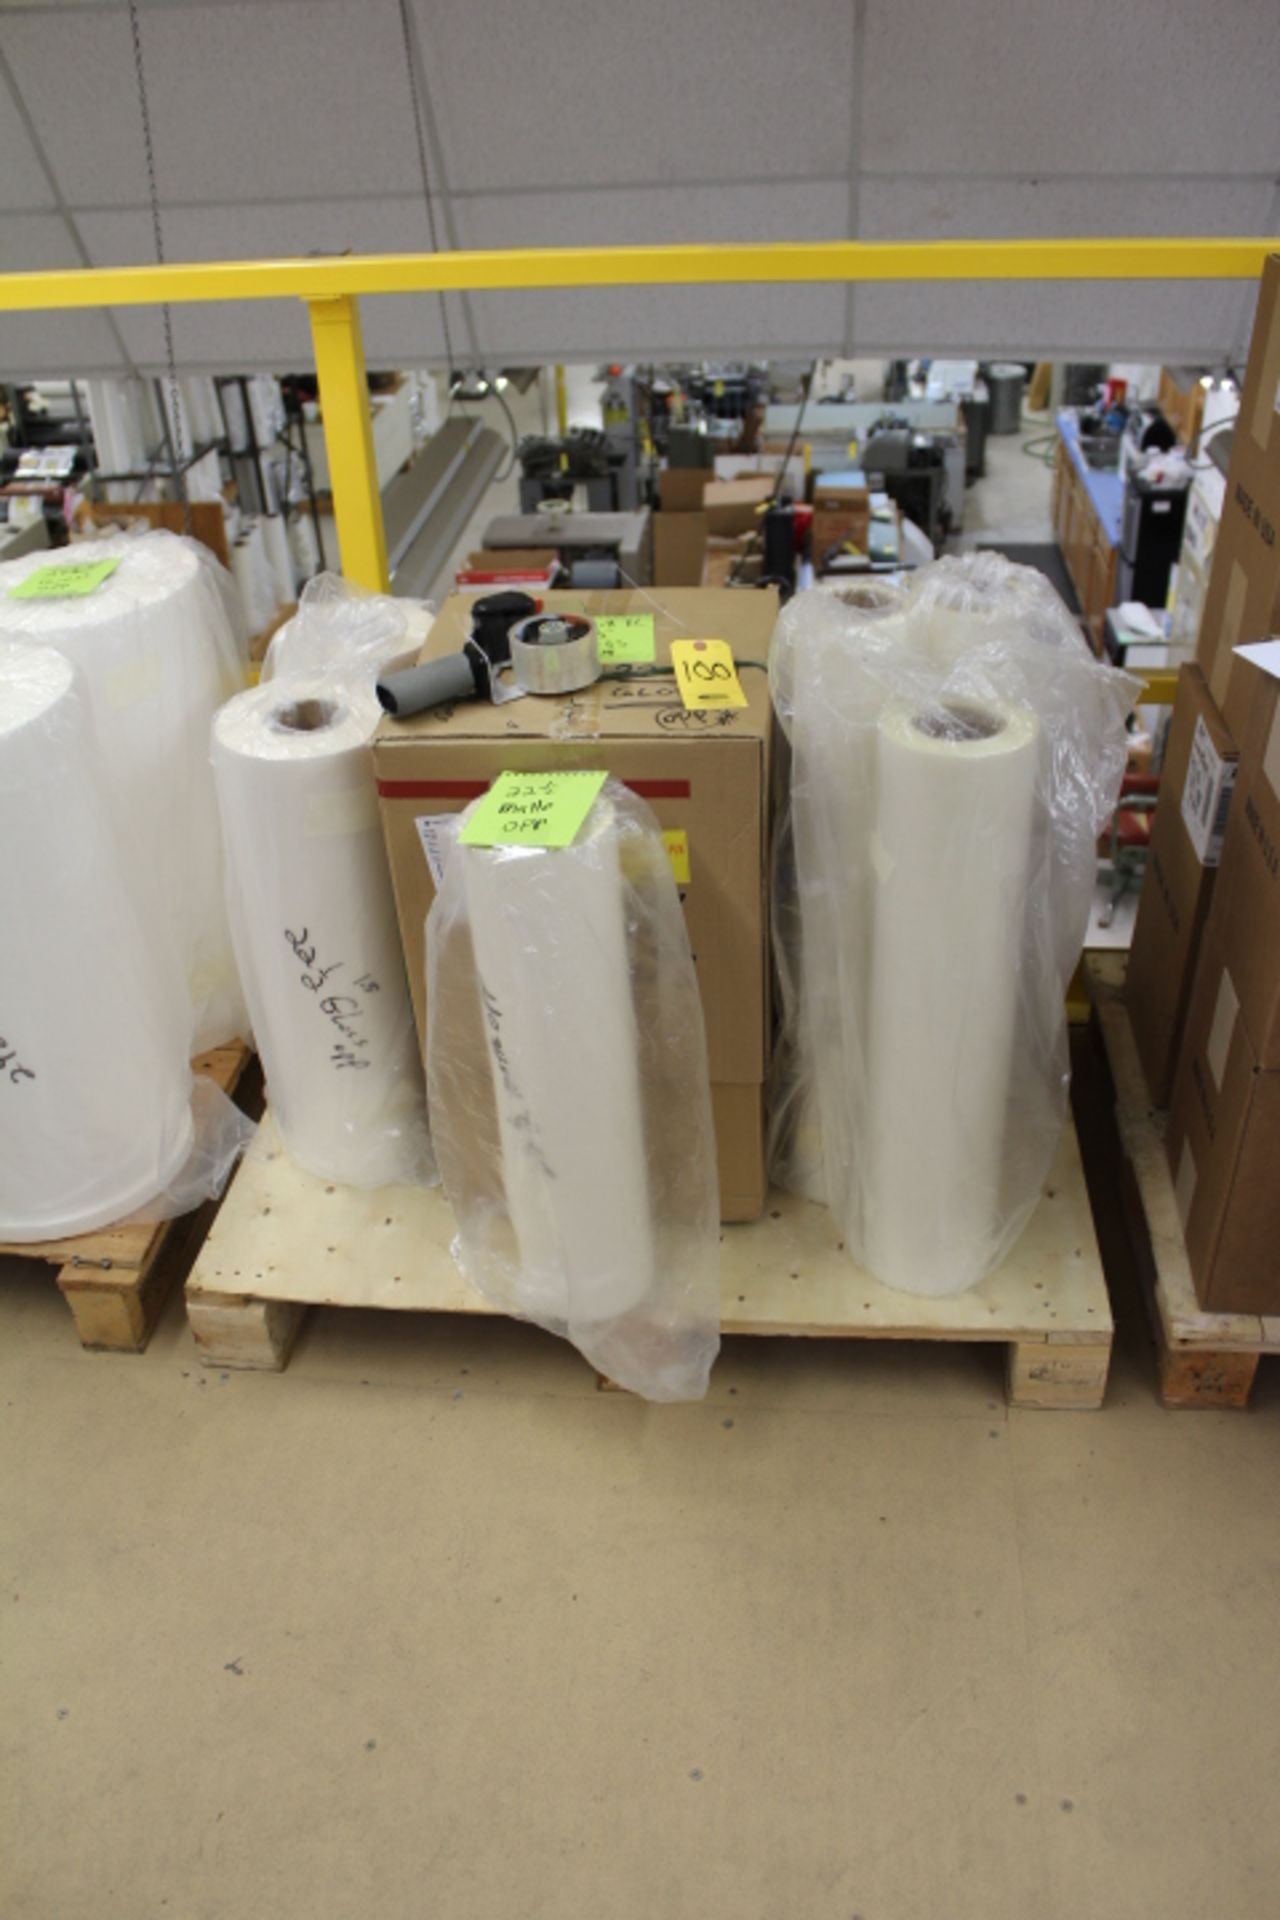 THERMAL LAM FILM 1.2 MIL GLOSS AND MATTE (OPP) VARIOUS SIZES-RUNS ON AUTOBOND & ECOSYSTEMS